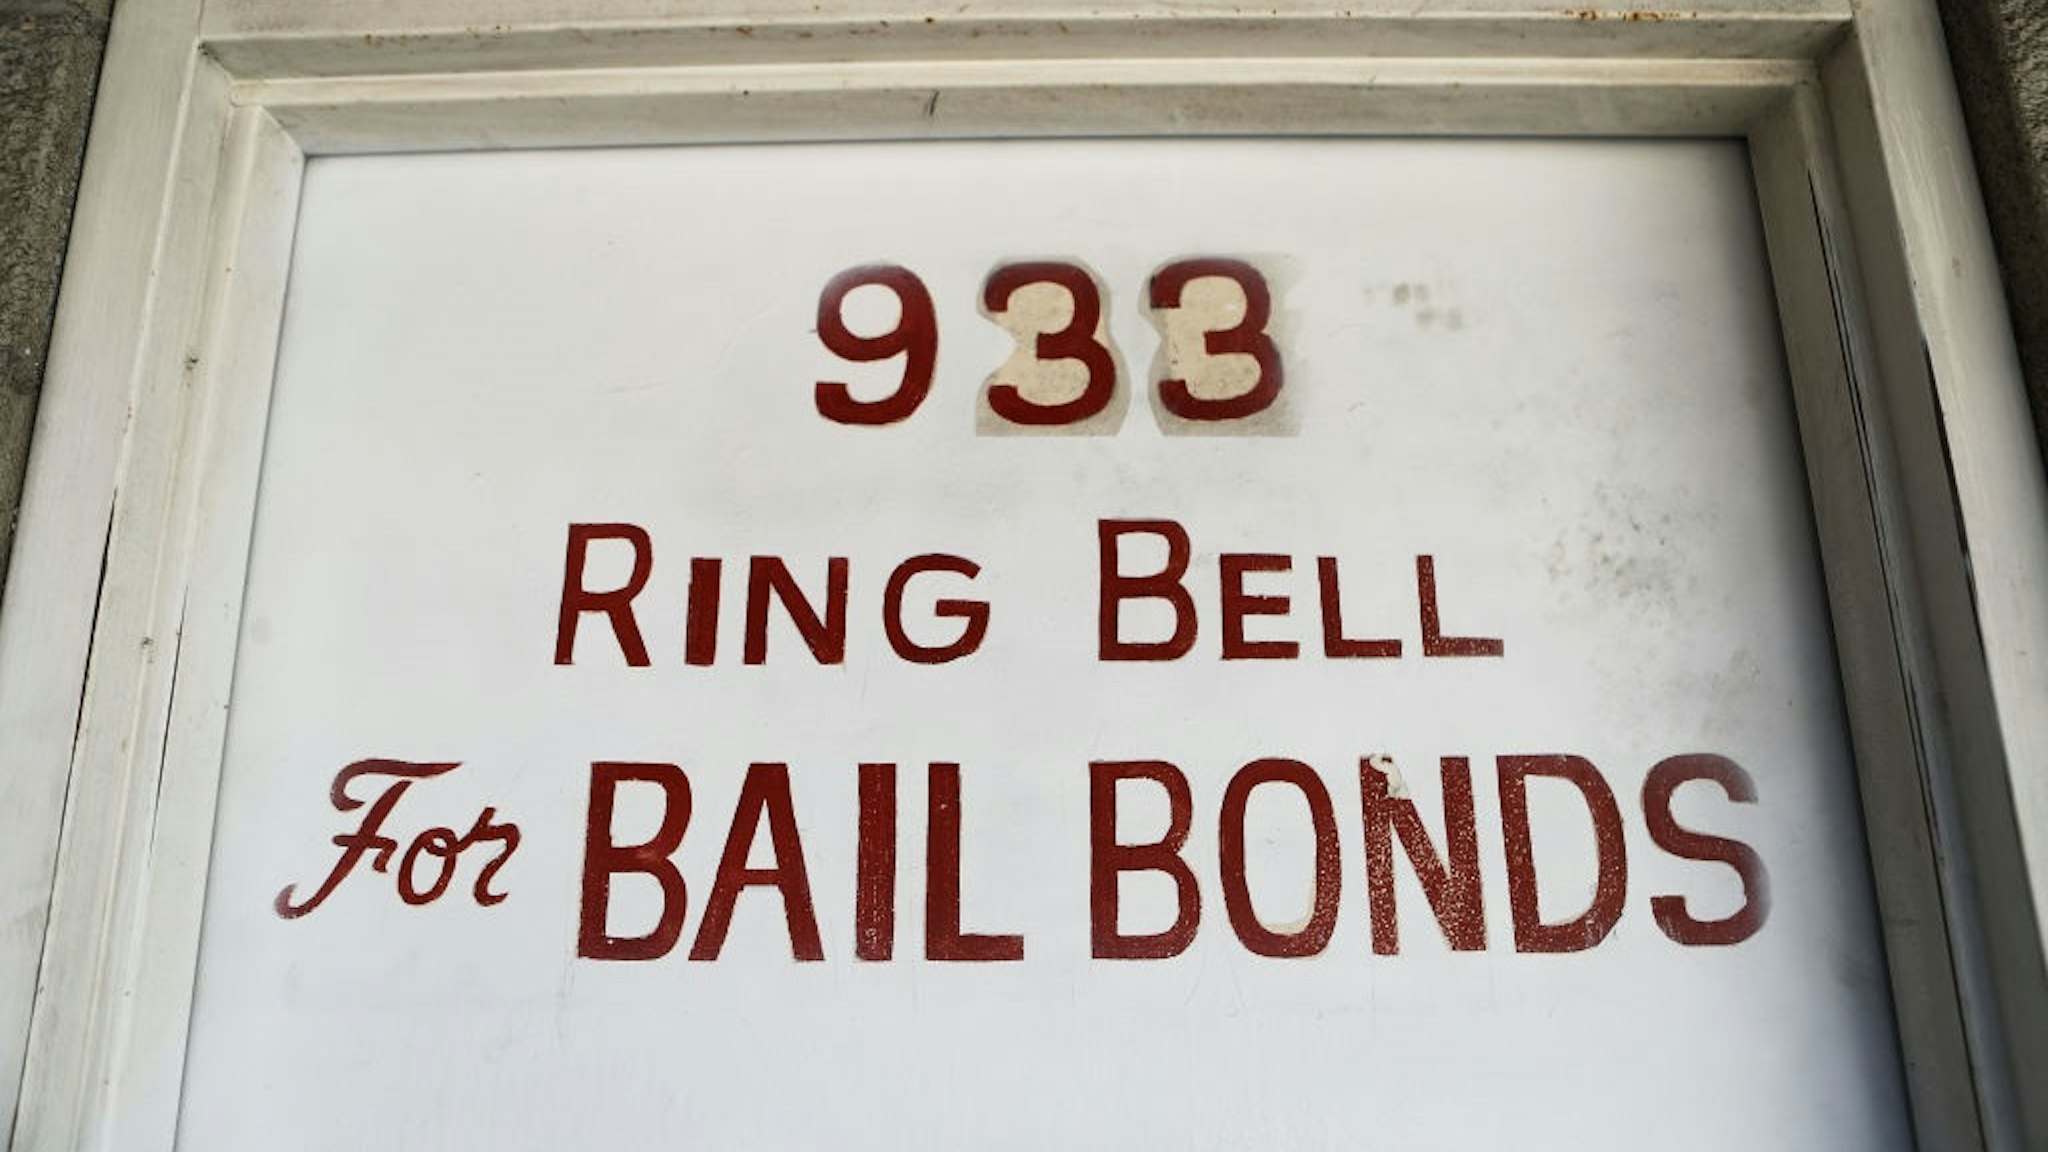 LOS ANGELES, CA - AUGUST 29: A sign advertises a bail bond company on August 29, 2018 in Los Angeles, California.